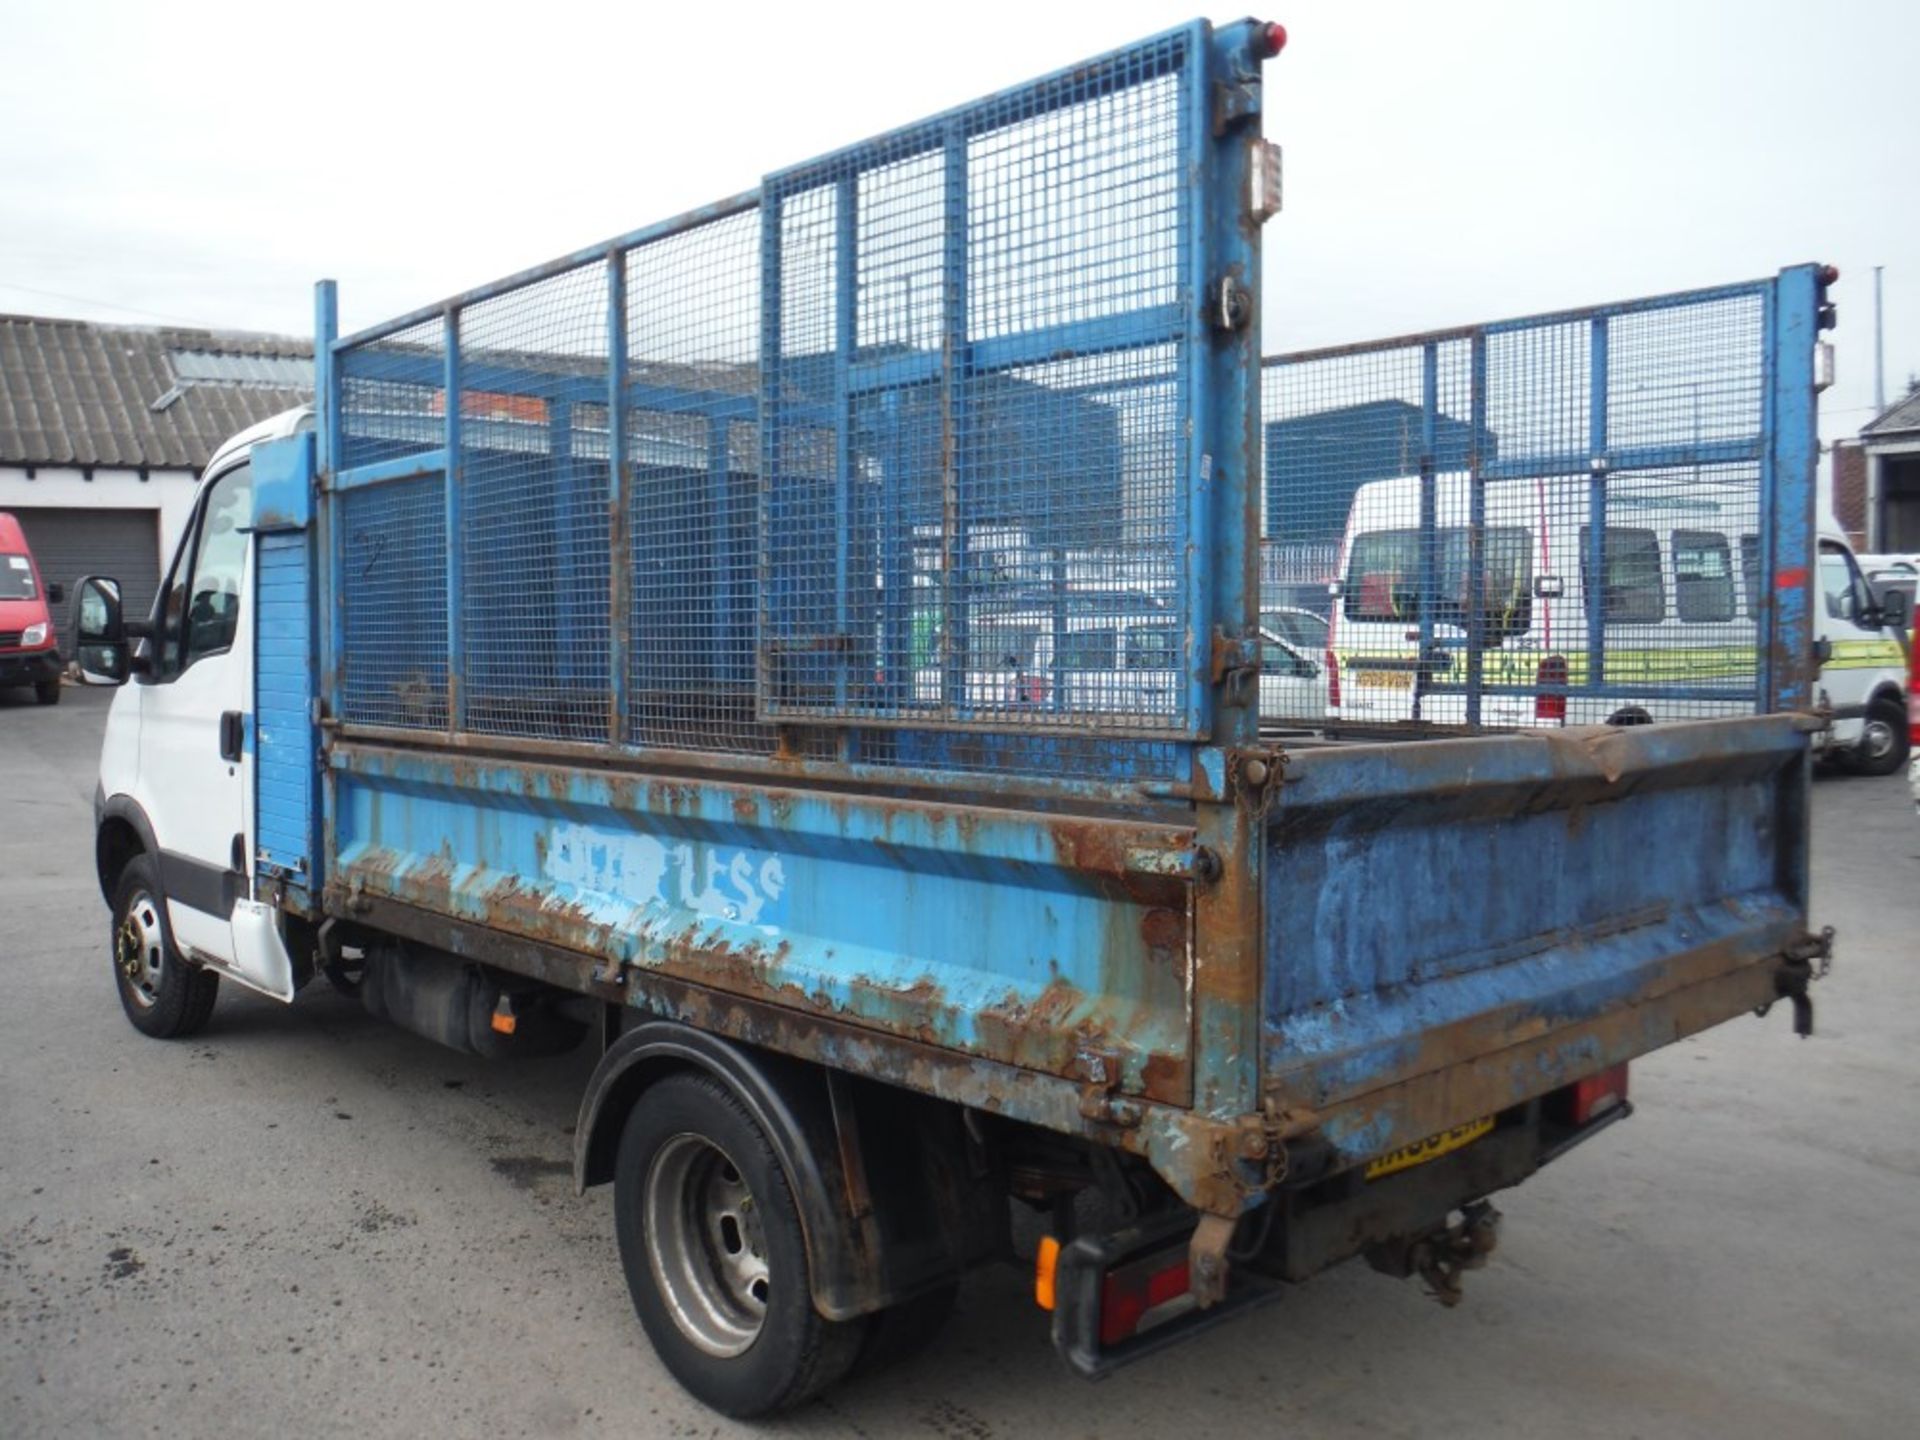 58 reg IVECO DAILY 50C15 CAGED TIPPER, 1ST REG 10/08, TEST 06/15, 141129M, V5 HERE, 1 OWNER FROM NEW - Image 3 of 5